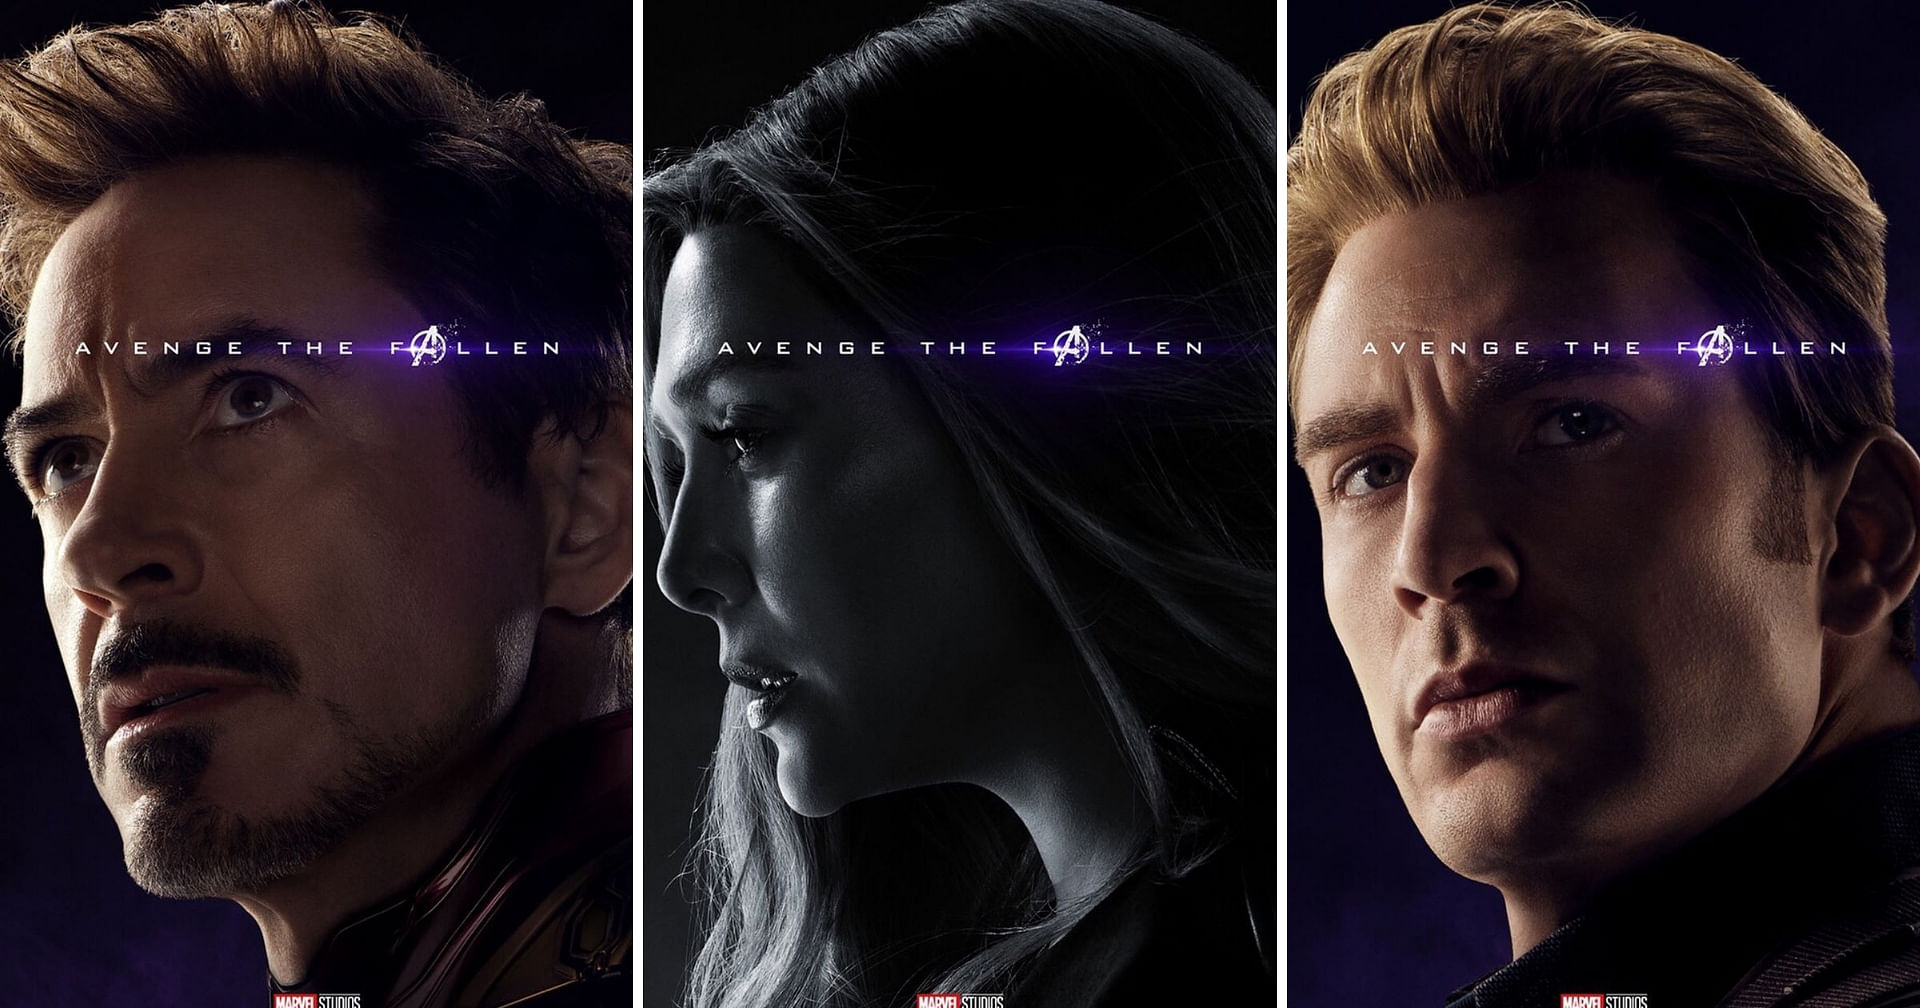 Growth Heads on Instagram: Relive the Endgame⚡ Read to find out the secret  behind the perfect marketing campaign for the legendary movie, Avengers:  Endgame! . . . . #endgame #avengers #marvel #ironman #